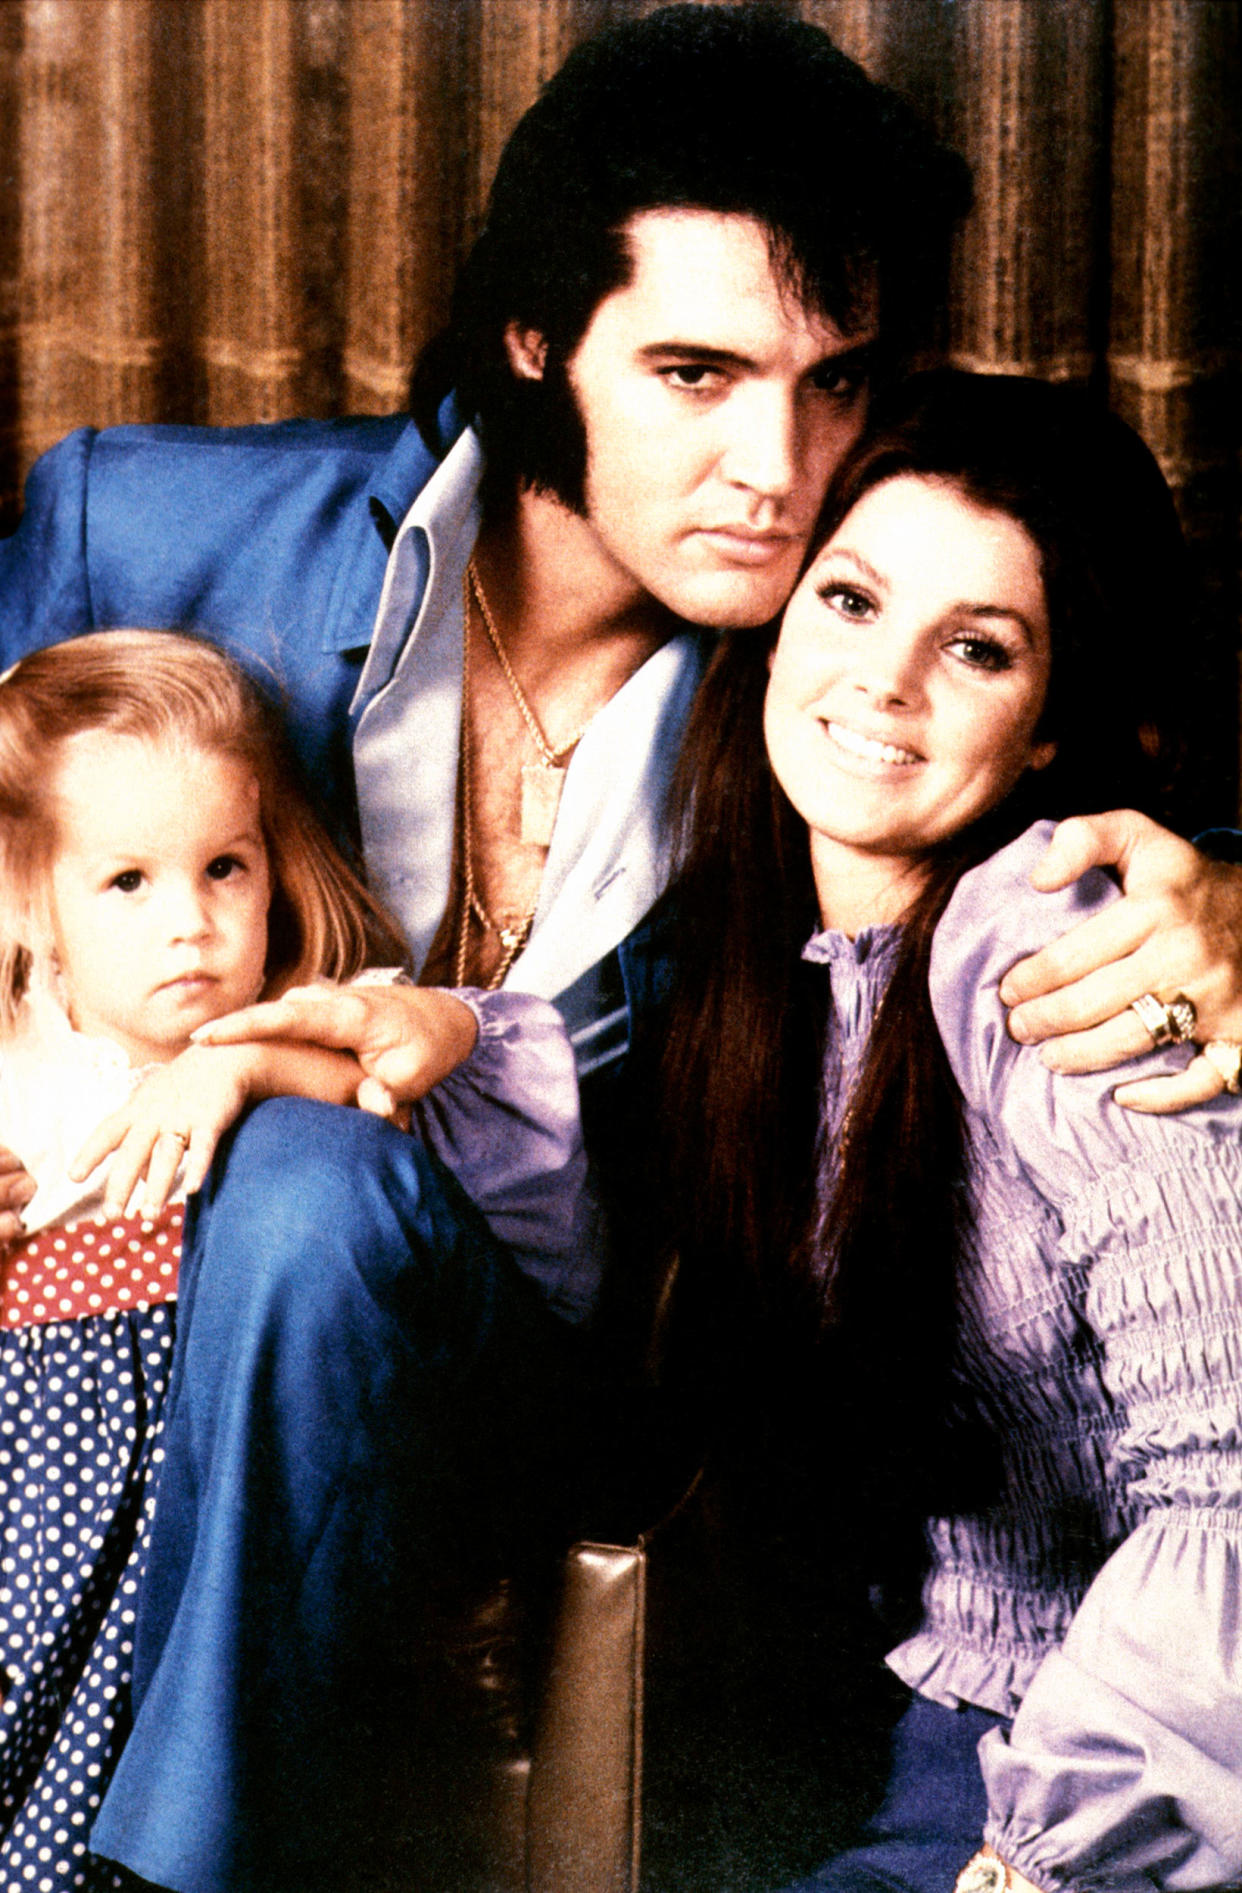 Lisa Marie Presley (left) with parents Elvis and Priscilla Presley in 1970. (Redferns / Getty Images)